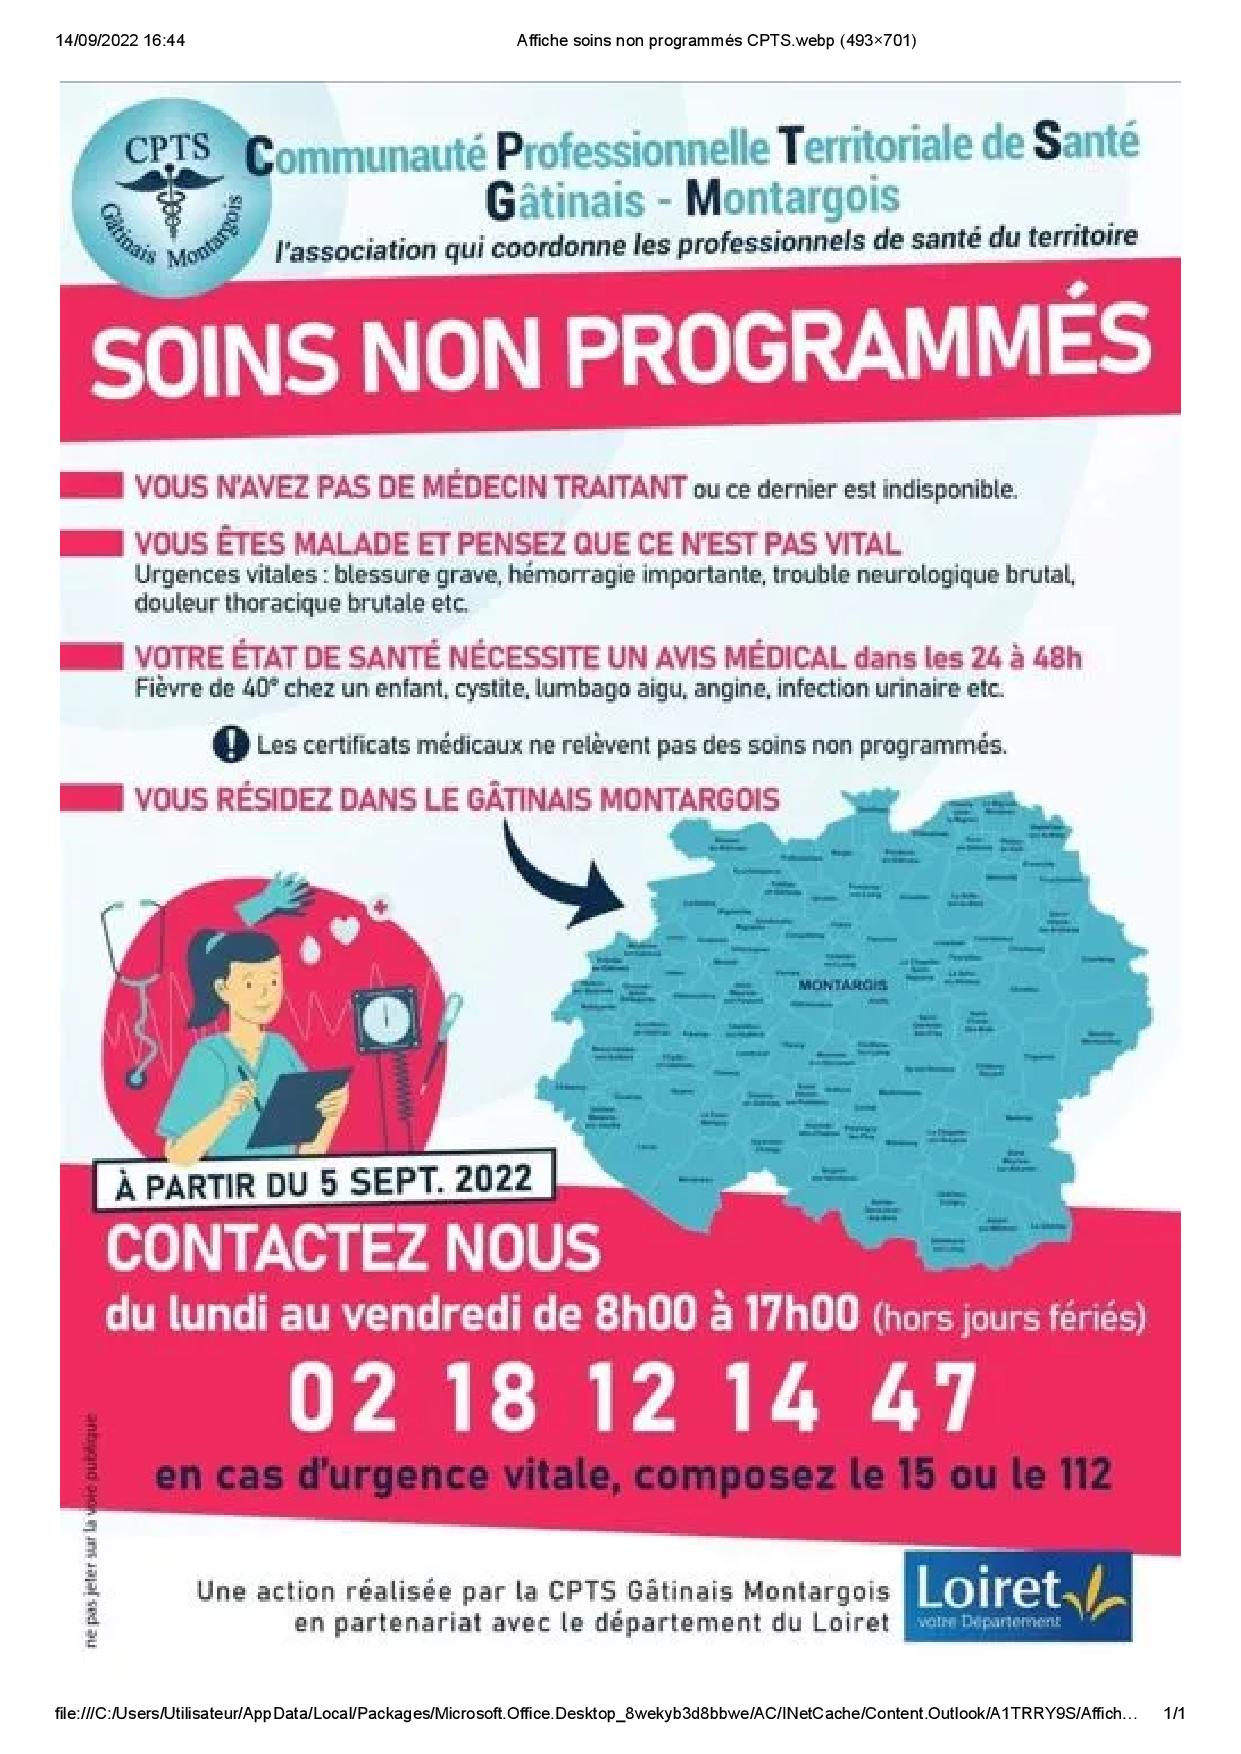 Affiche soins non programmés CPTS-page-001.jpg